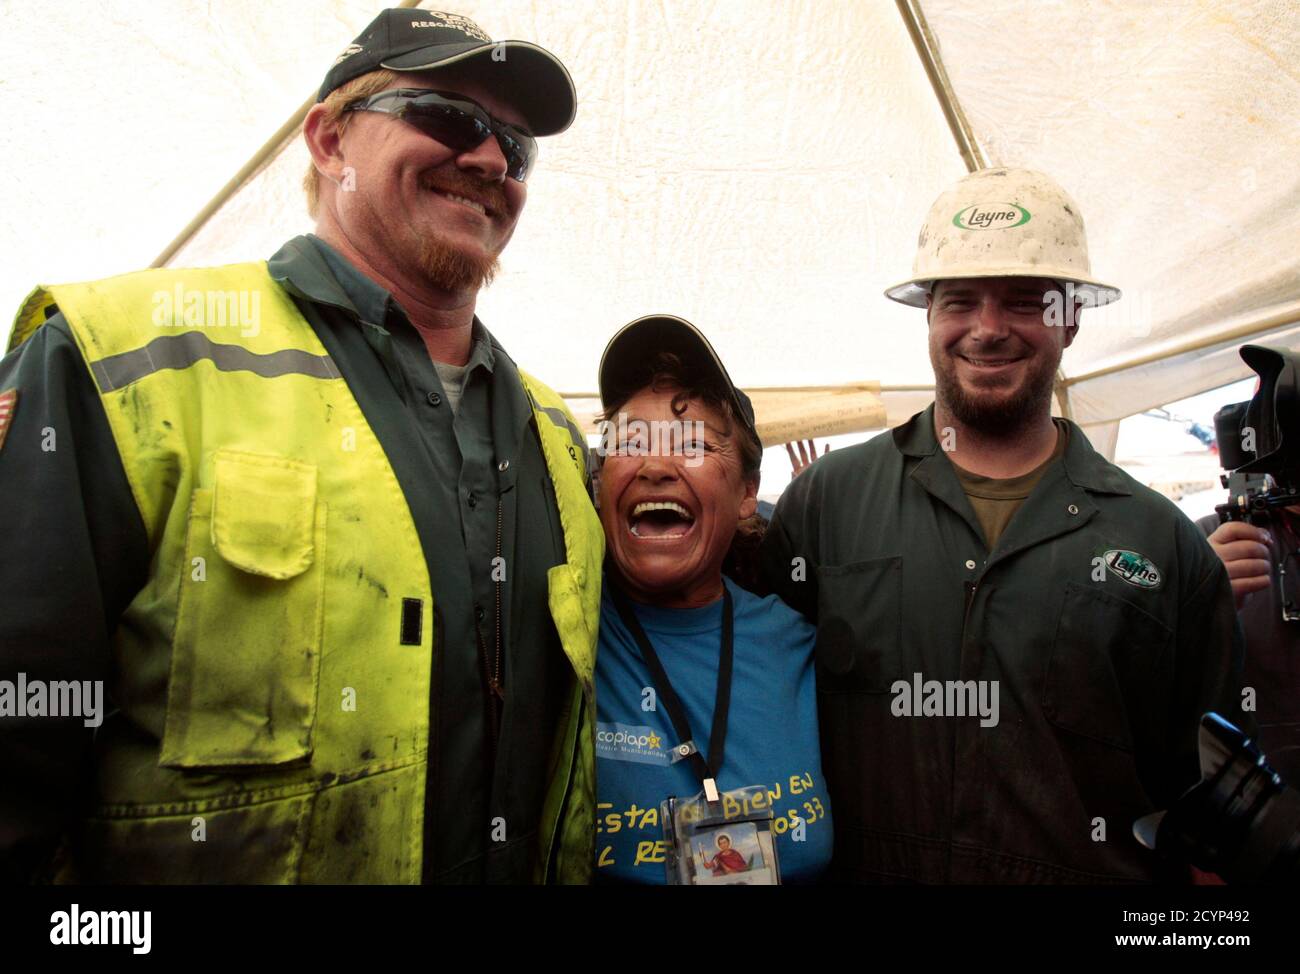 Elizabeth Segovia, sister of Dario Segovia, one of the 33 miners trapped deep underground from an accident on August 5 at San Jose mine, meets with the T 130 drilling machine operators U.S Jeff Heart (L) and Matt Staffel after completing the escape hole for the miners near Copiapo city October 9, 2010. REUTERS/Luis Hidalgo (CHILE - Tags: POLITICS DISASTER EMPLOYMENT BUSINESS SOCIETY IMAGES OF THE DAY) Stock Photo